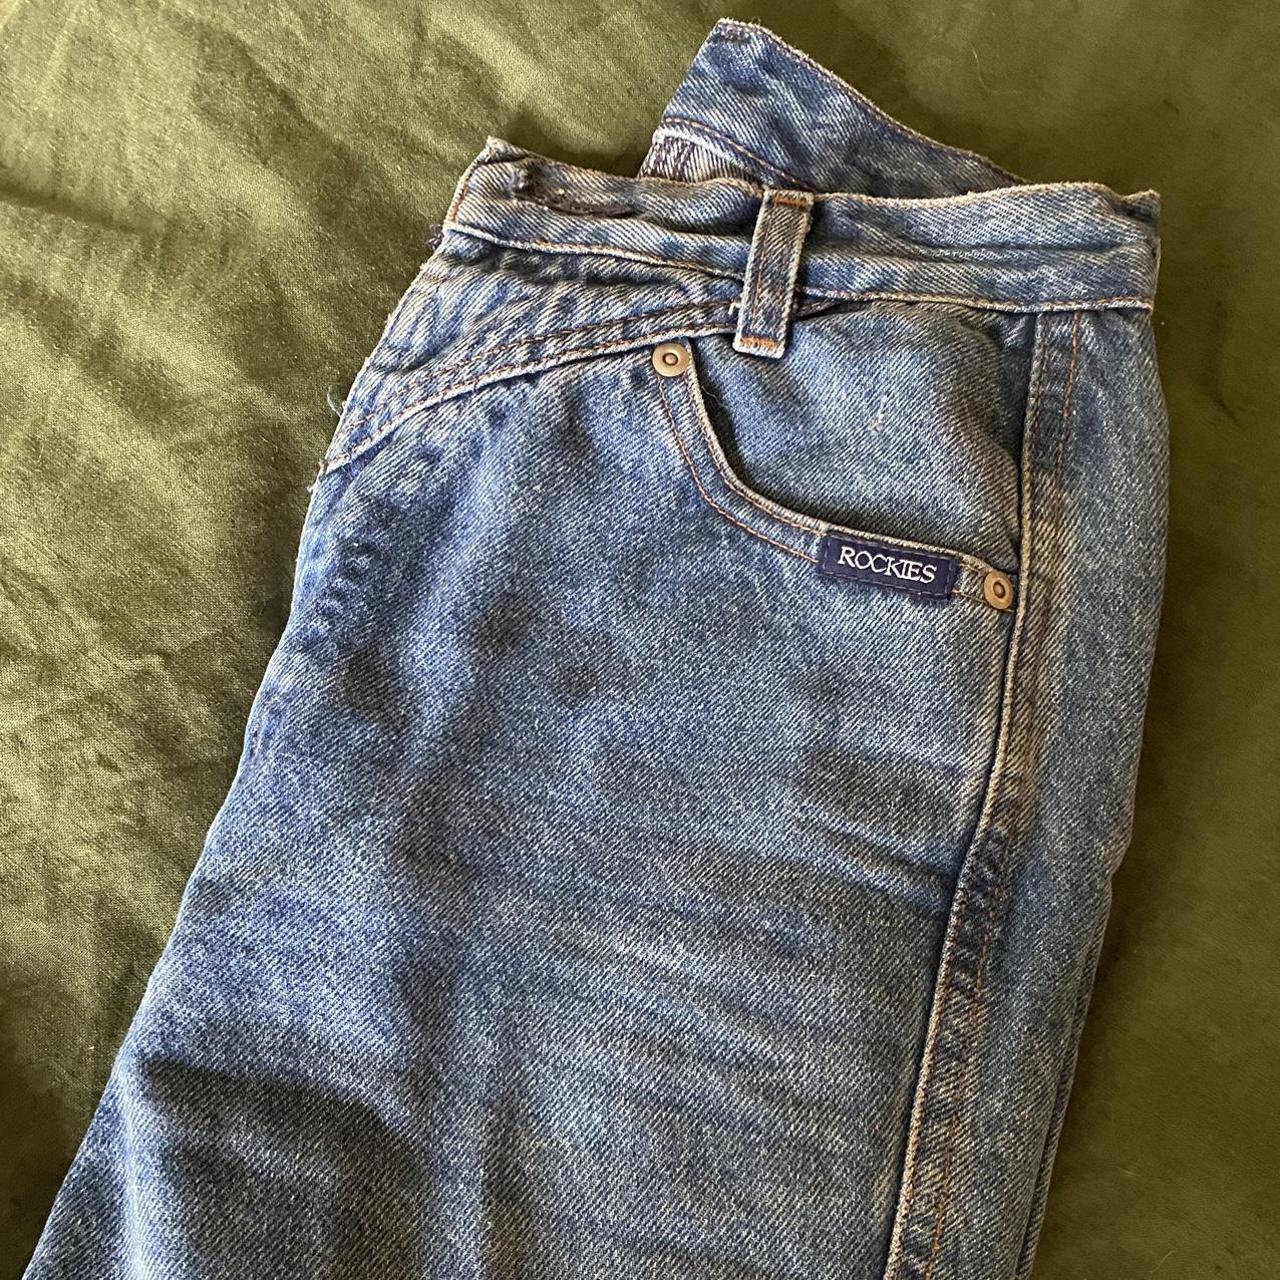 Vintage high wasted straight leg rockys jeans - Depop